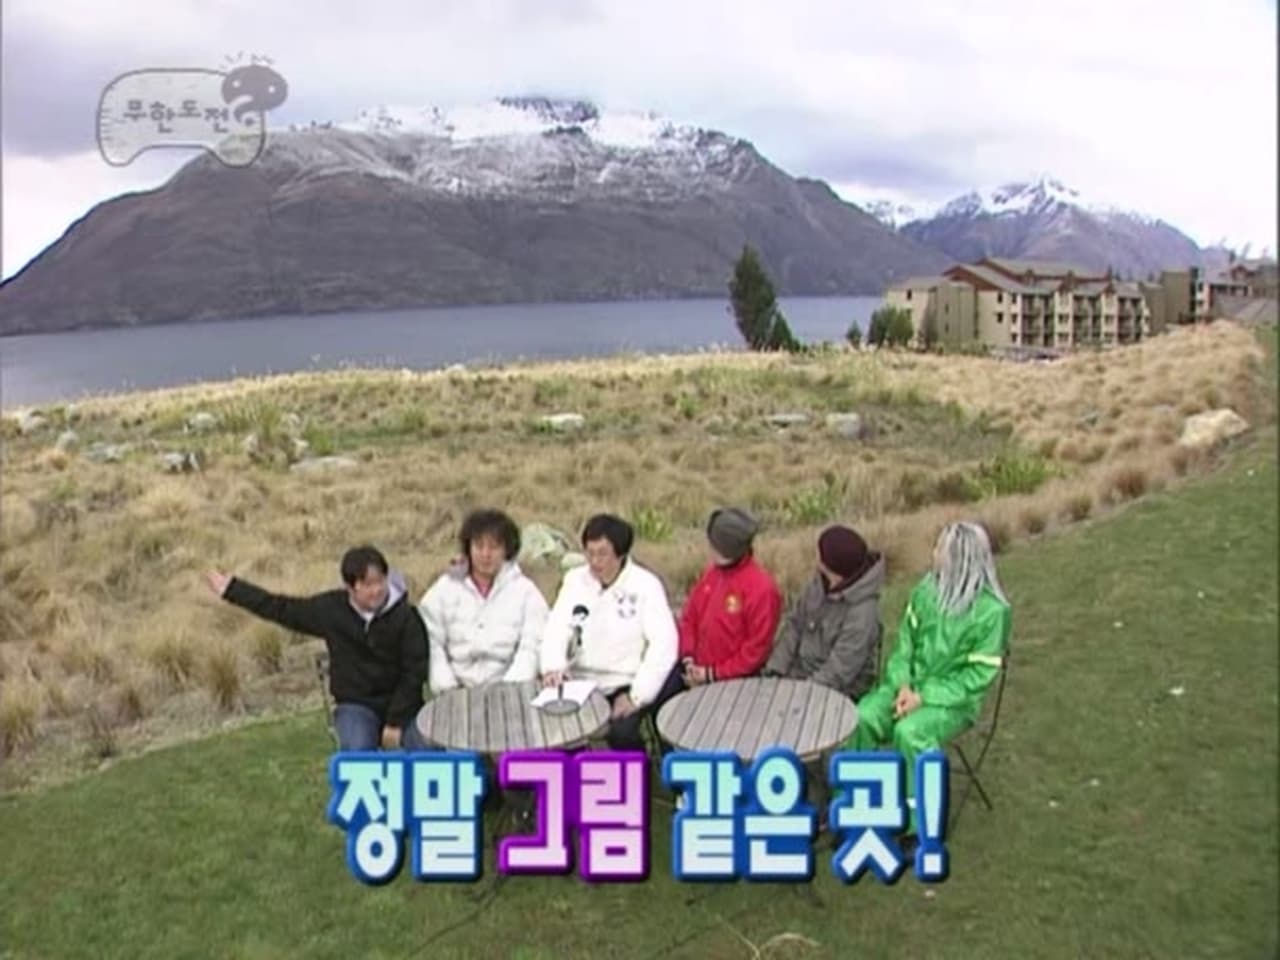 Infinite Challenge - Season 3 Episode 17 : 'The Return of the Bare-Faces' in Queenstown, New Zealand